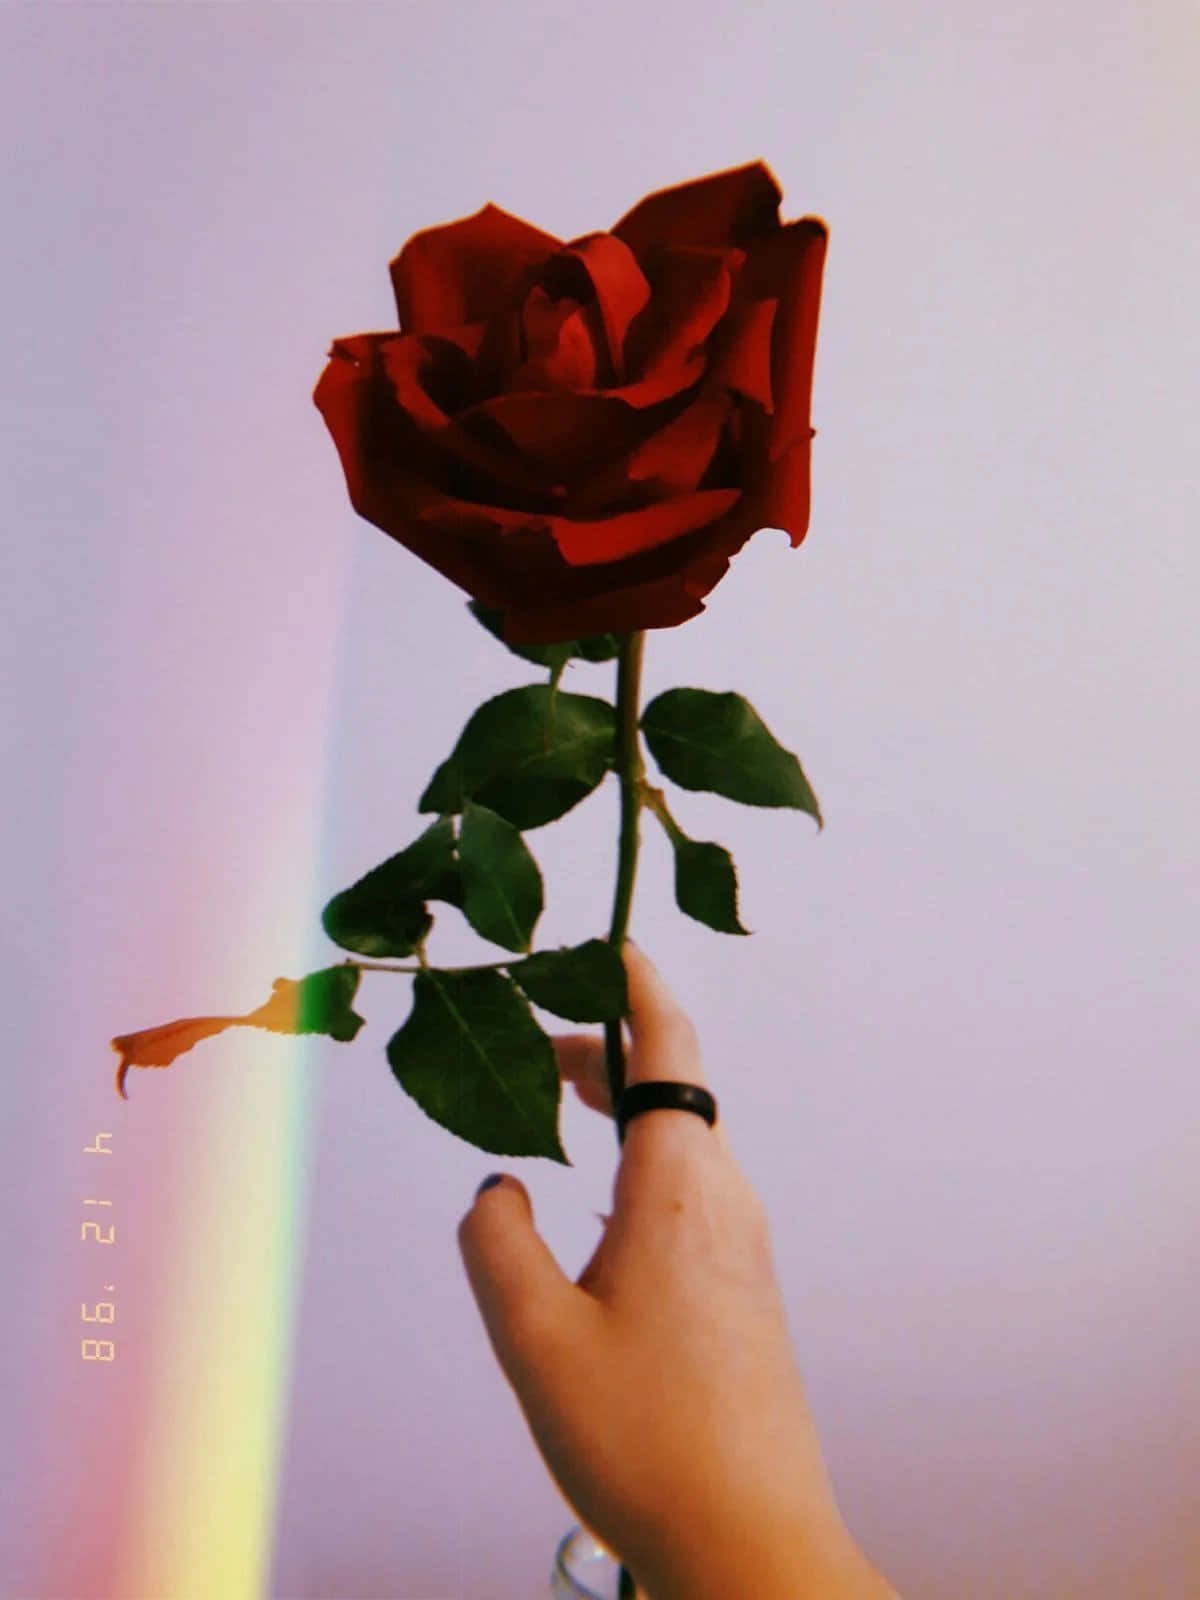 A Person Holding A Red Rose With A Rainbow In The Background